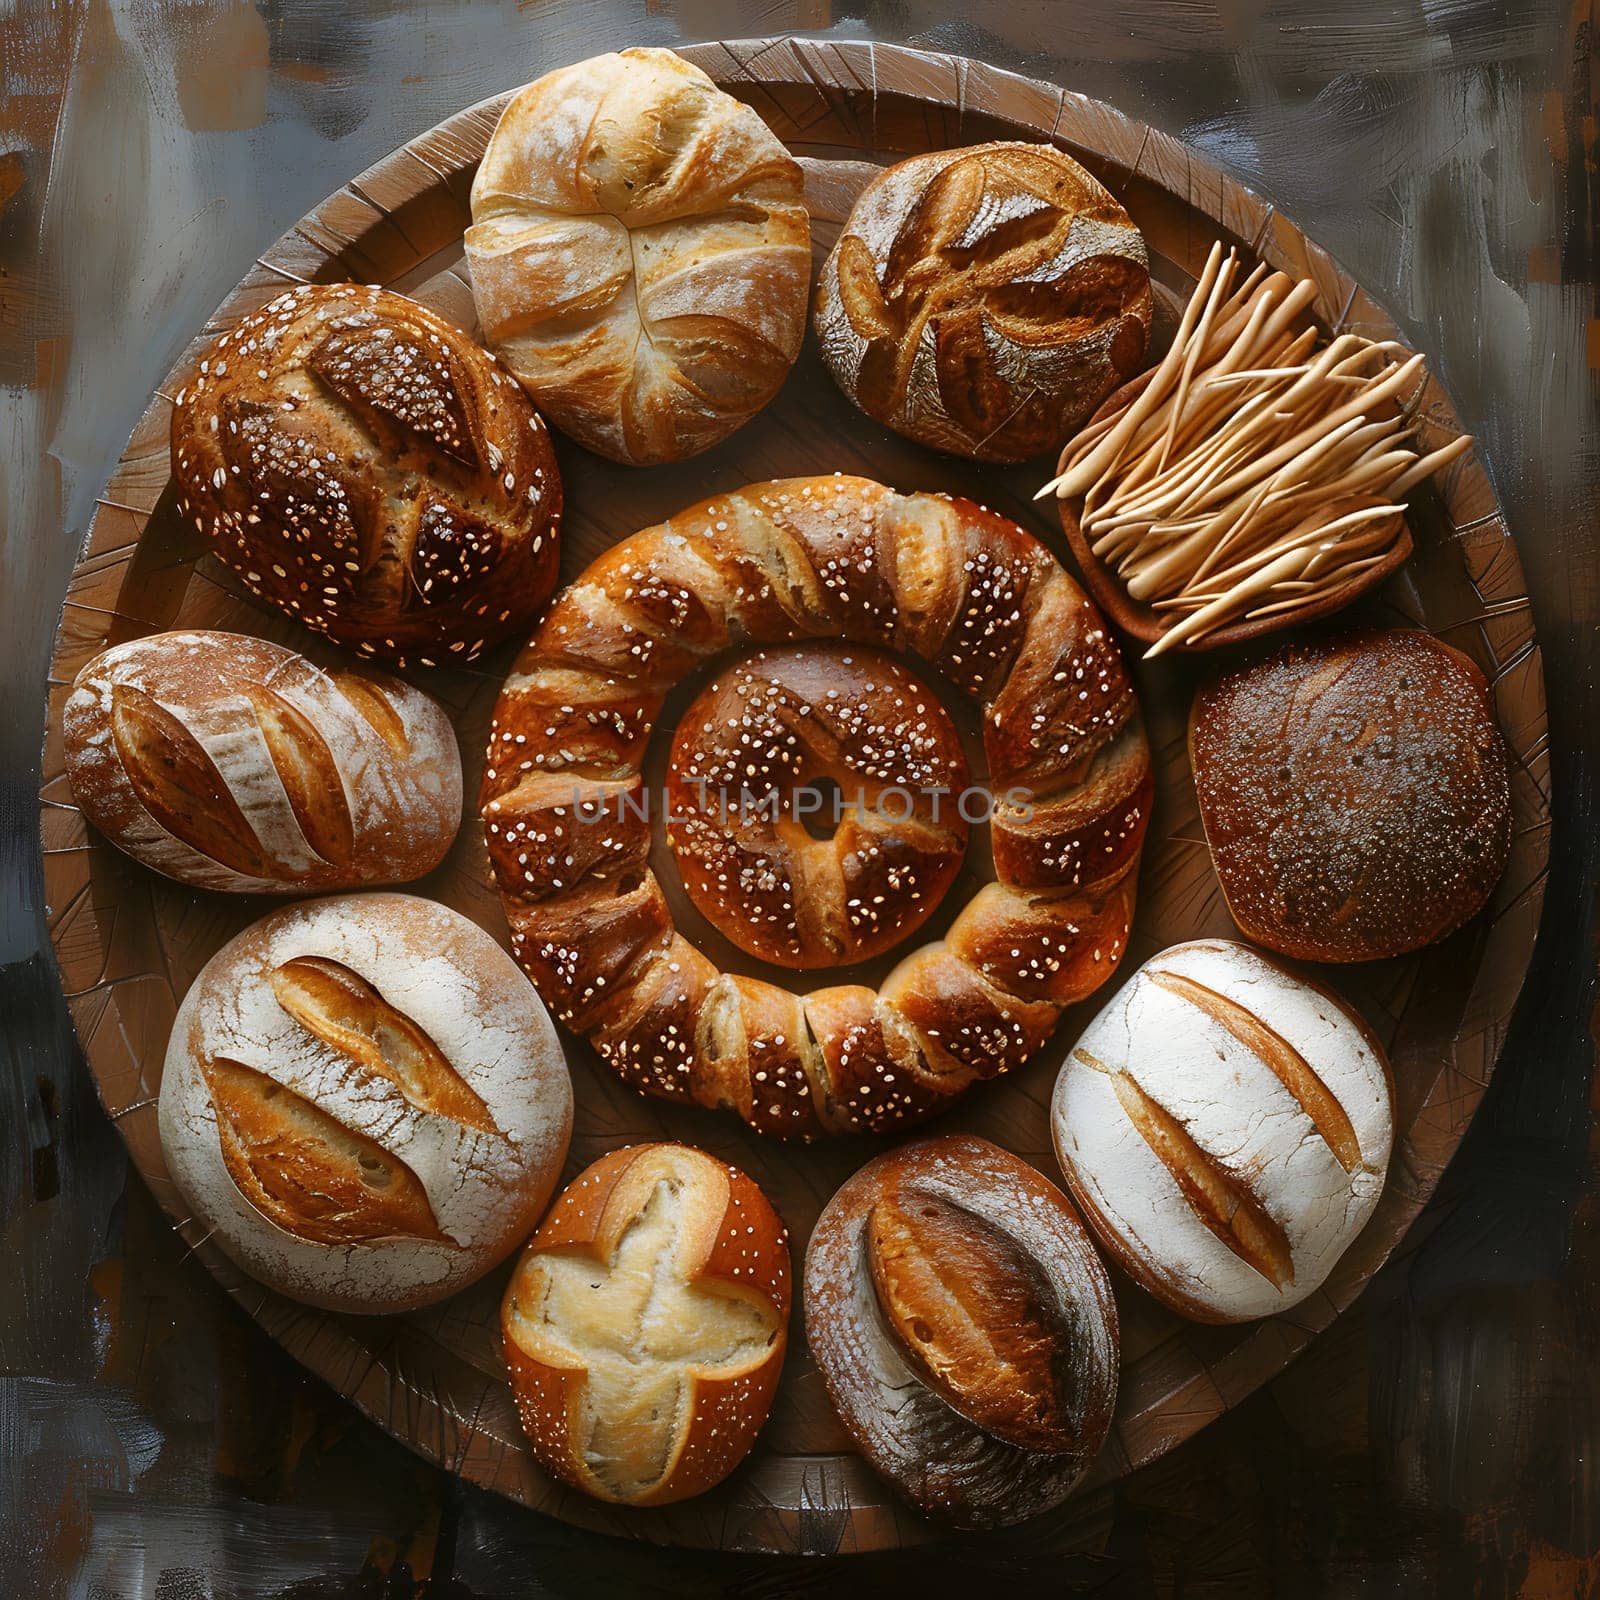 A rustic wooden tray displays an assortment of freshly baked bread, showcasing a variety of textures and flavors. This delightful mix of baked goods is sure to satisfy any craving for sweetness